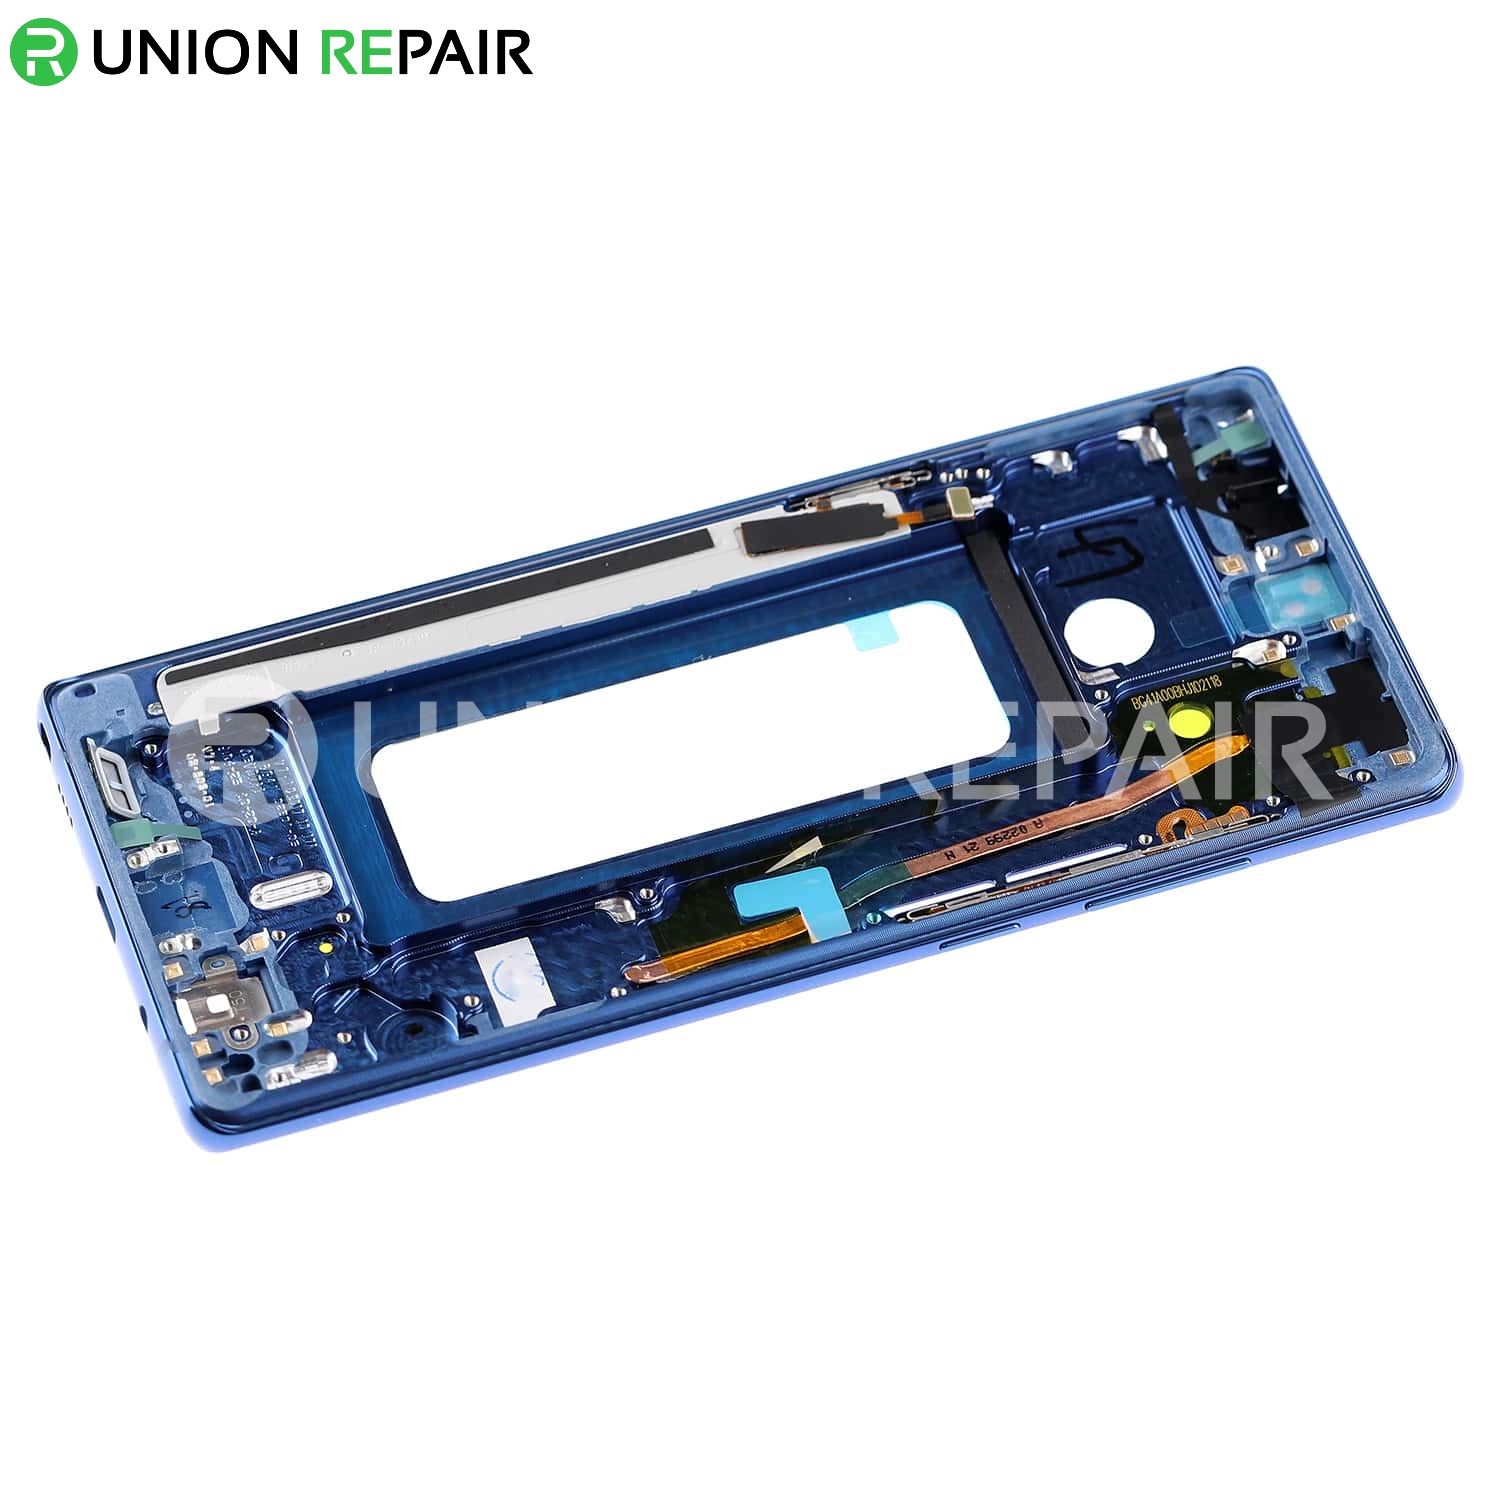 Replacement for Samsung Galaxy Note 8 SM-N950 Rear Housing Frame - Blue